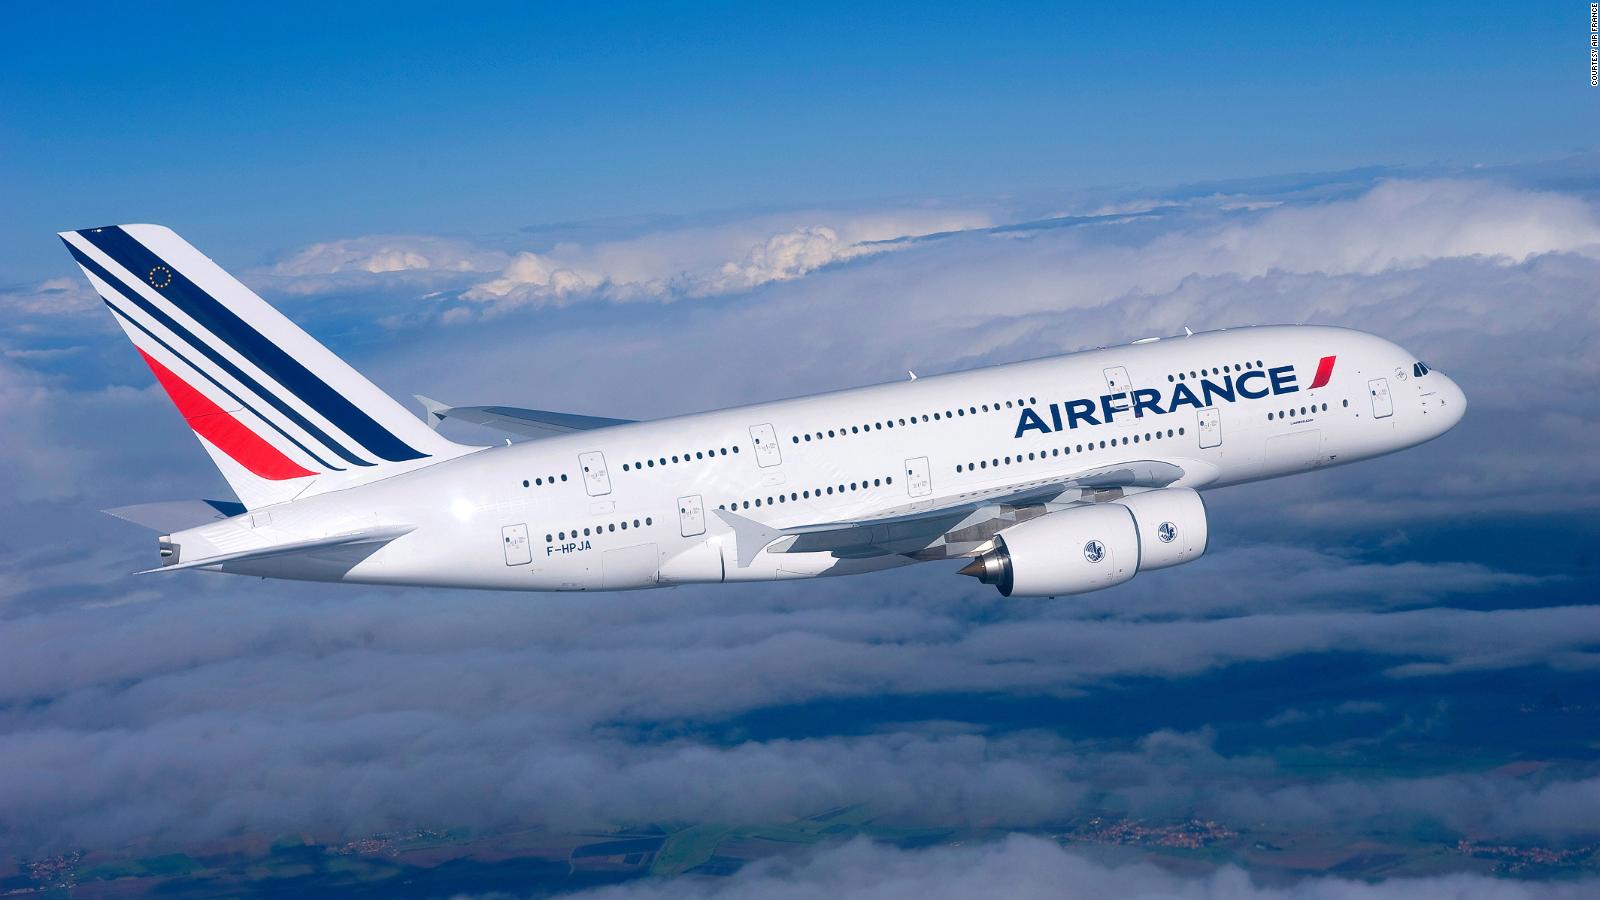 Airbus A380: Where to fly in a superjumbo before they go away